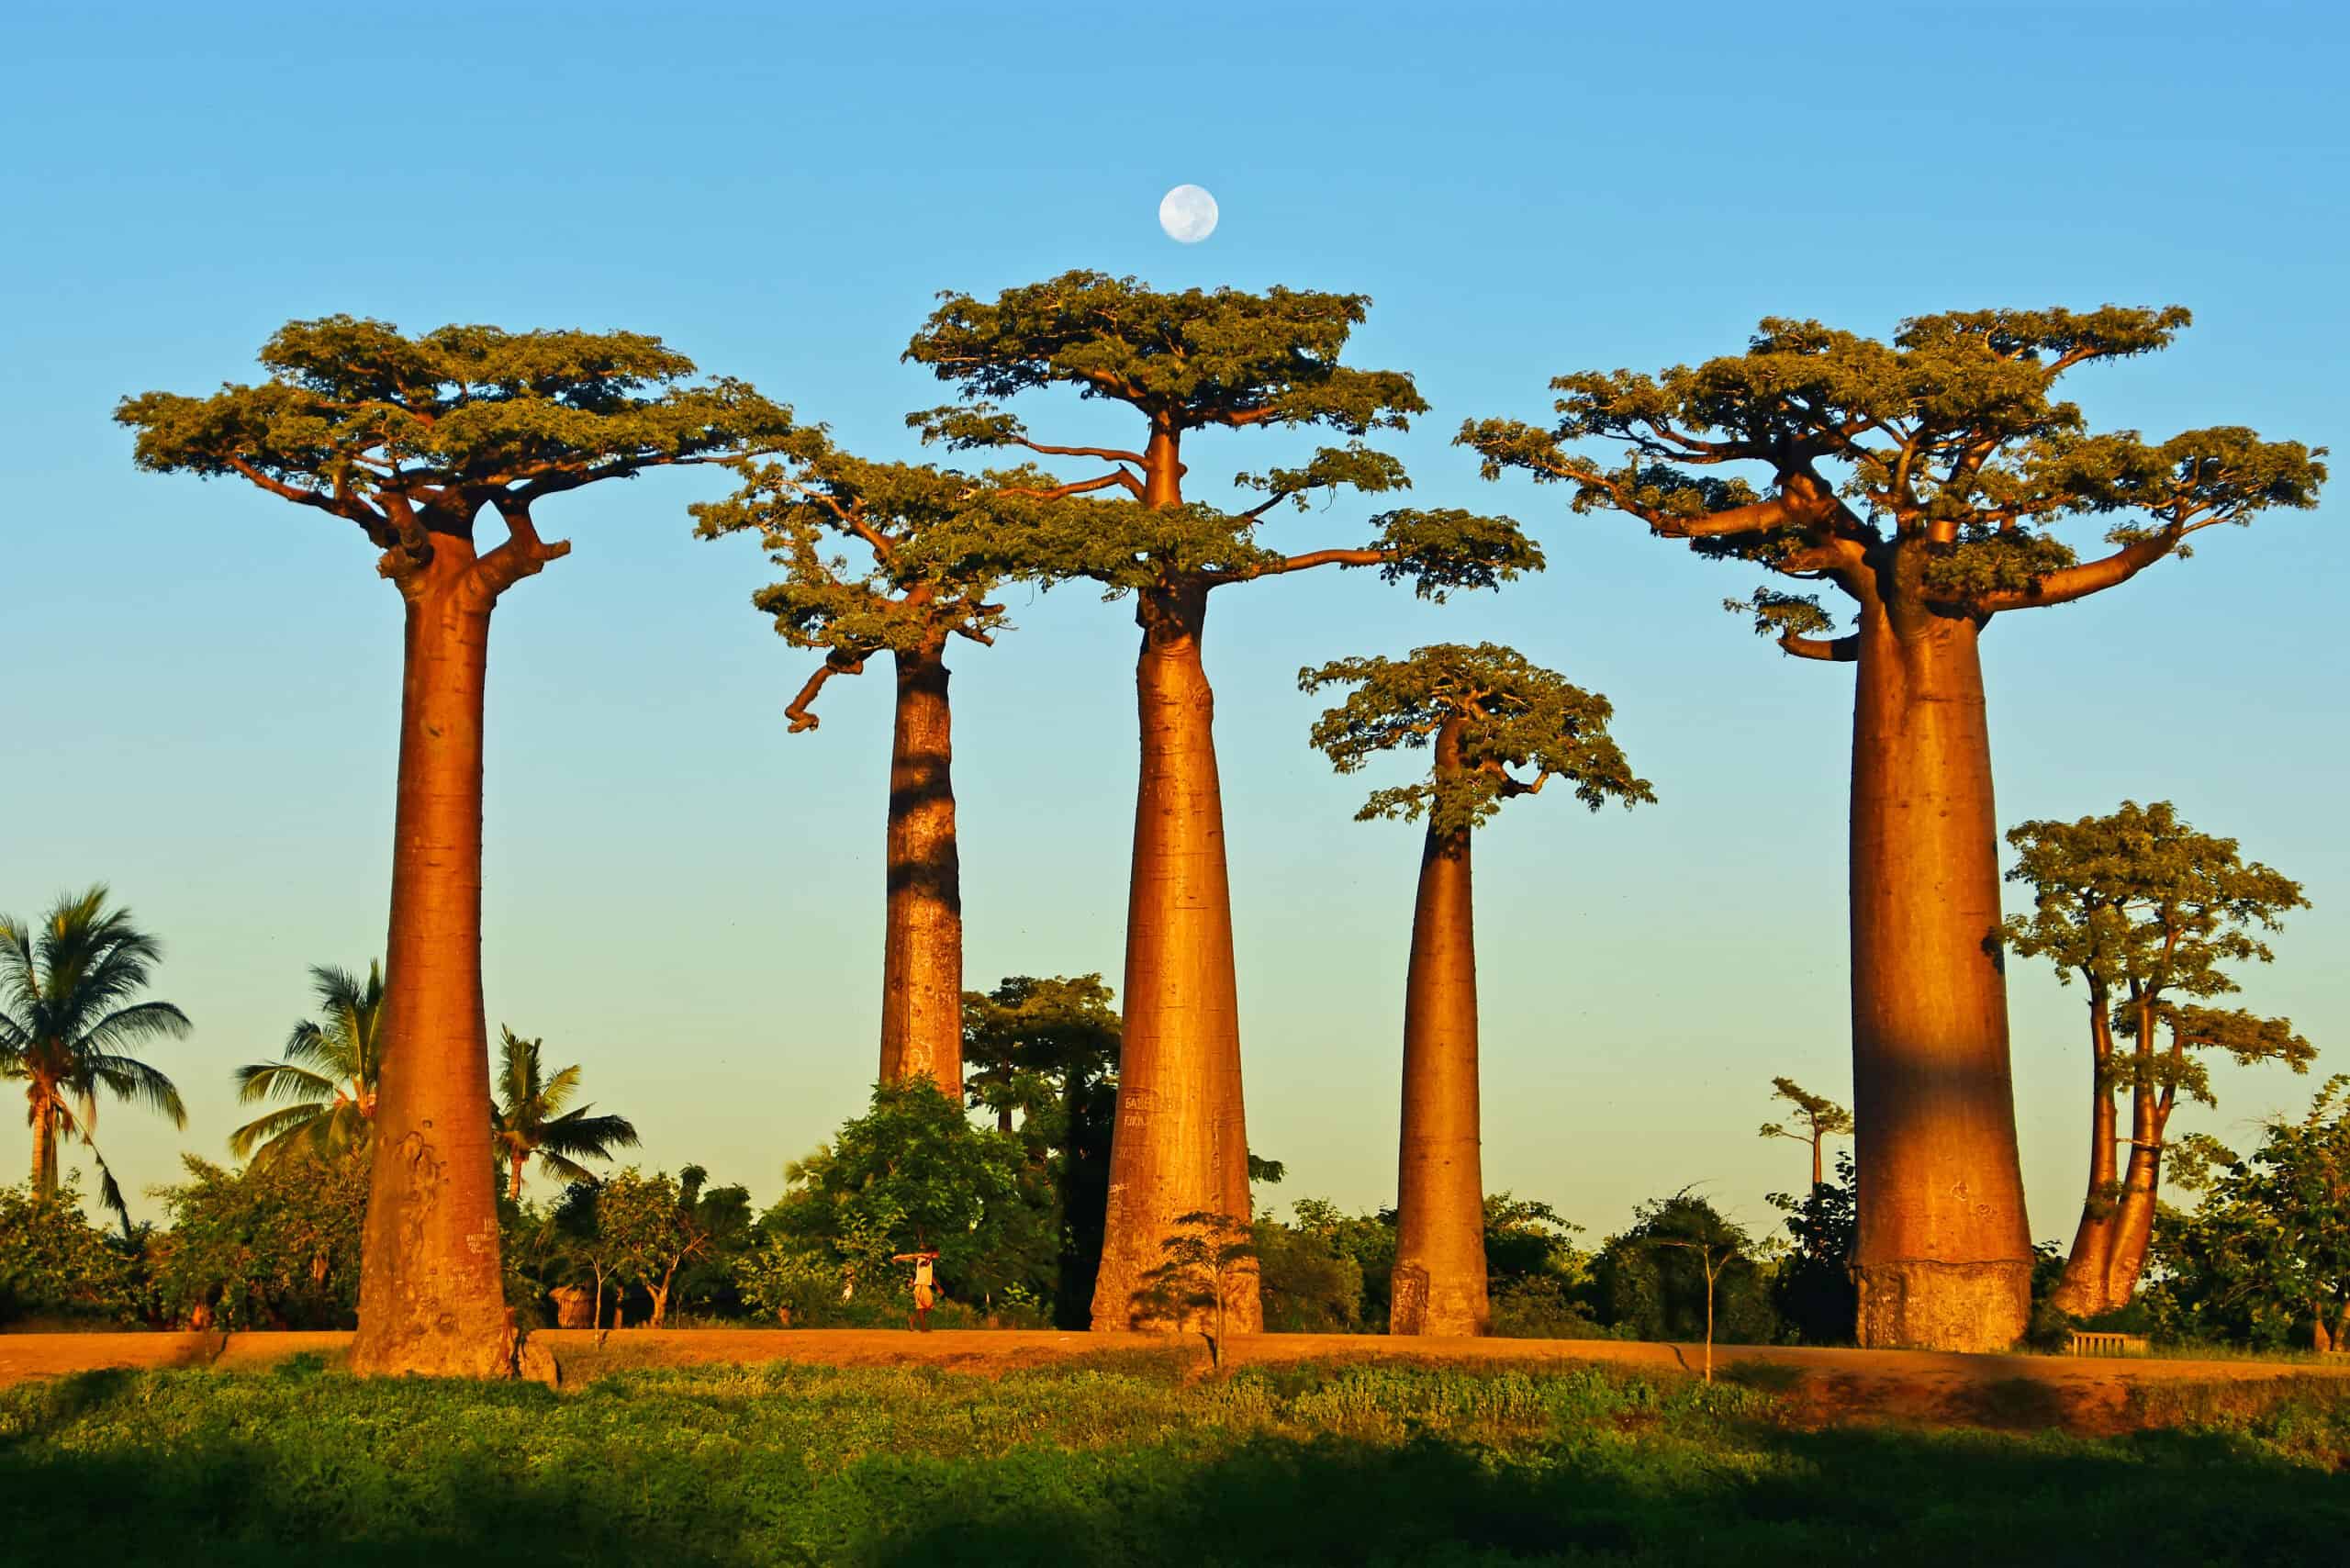 The Baobabs